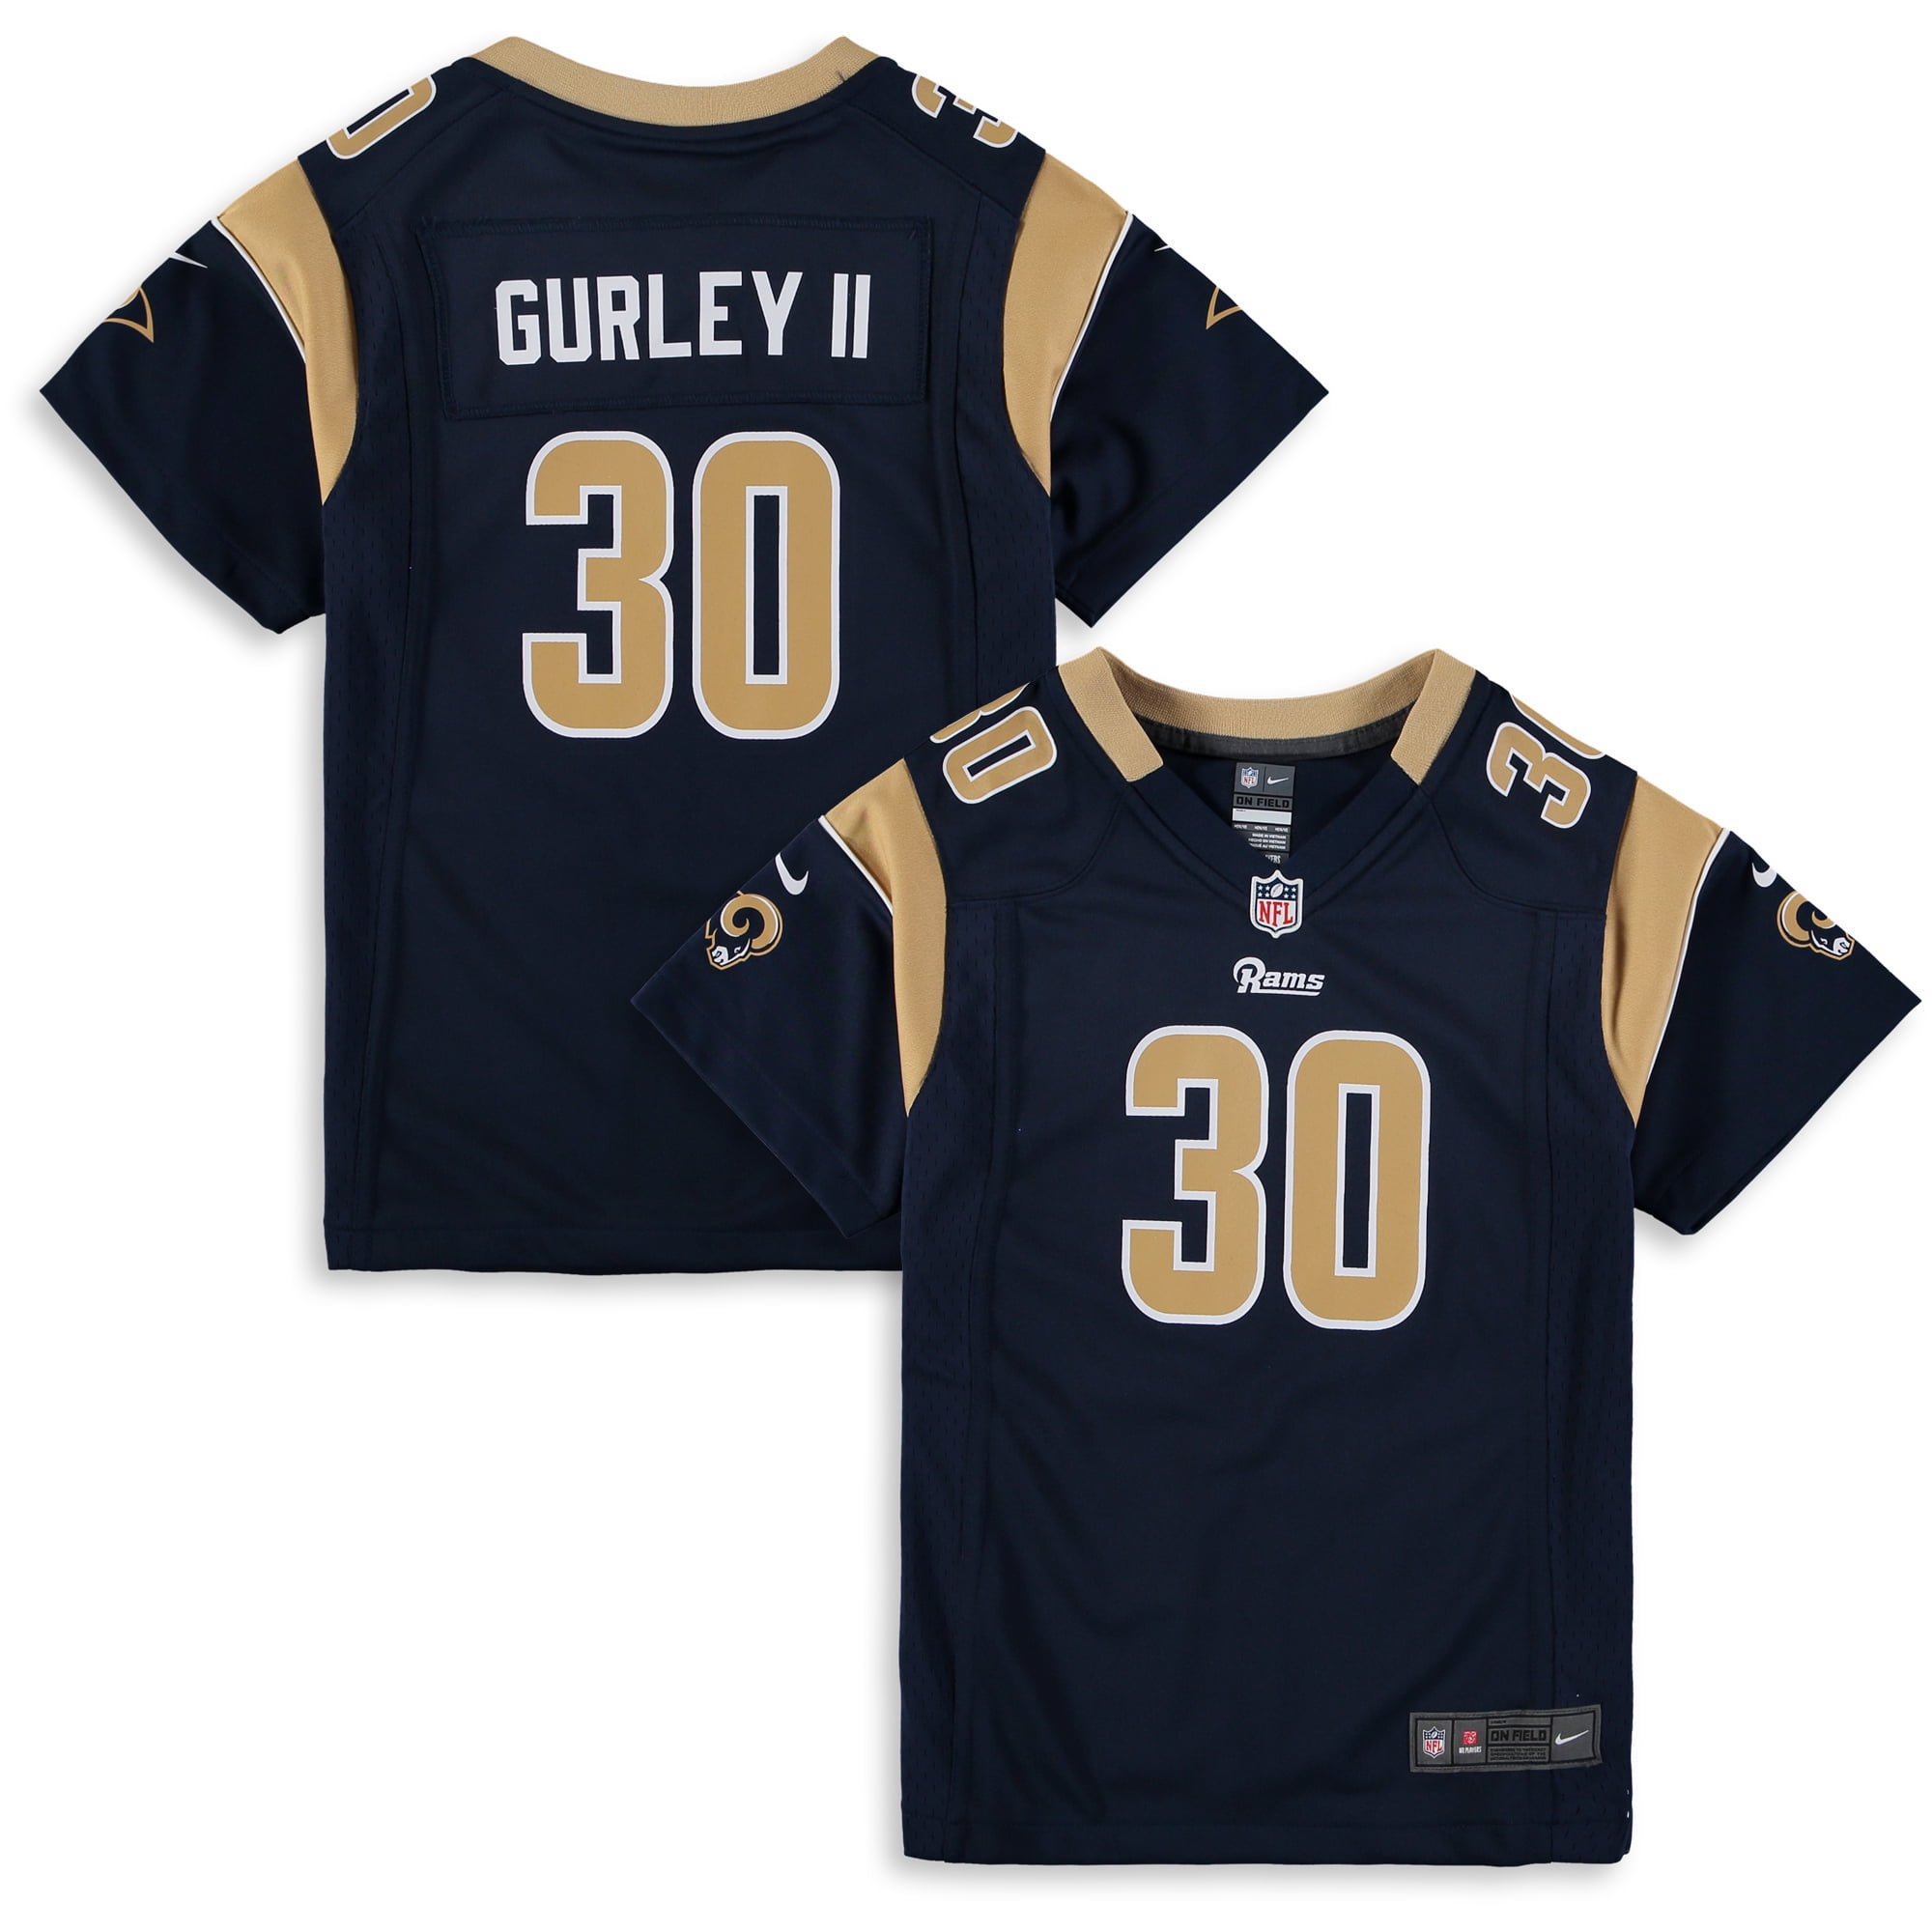 gurley jersey youth